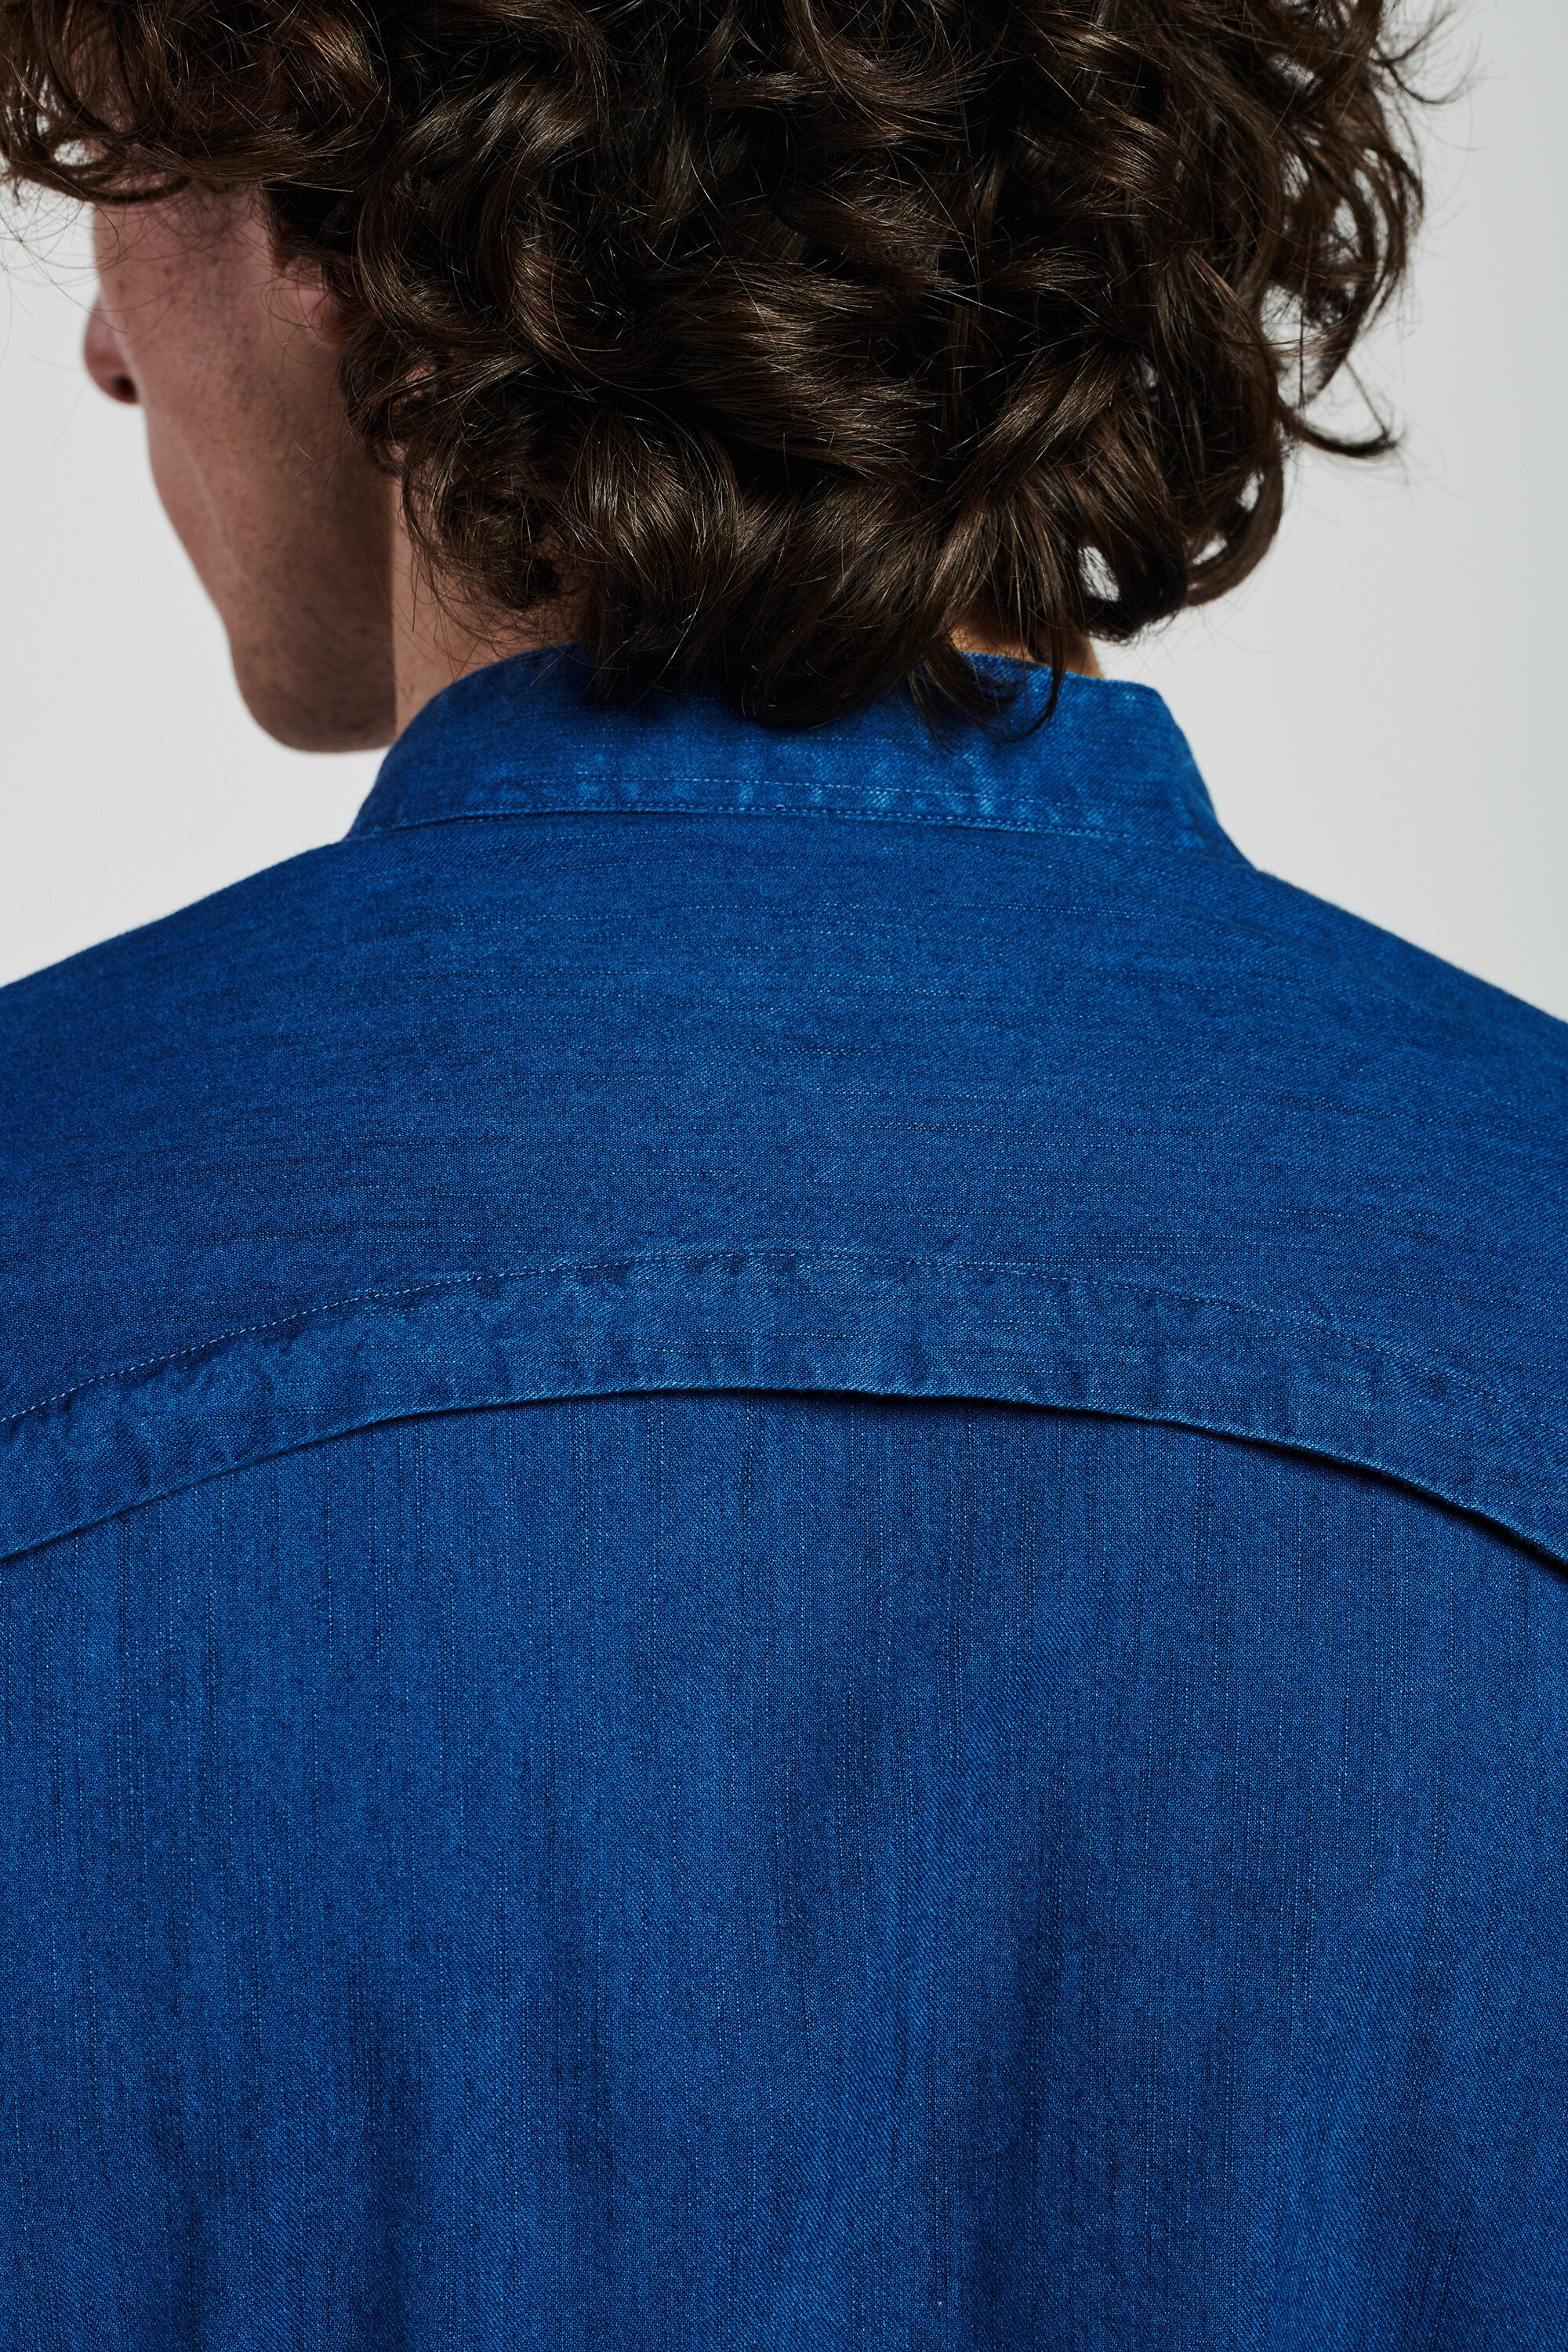 Confident Overshirt in a Bright Blue Indigo Dyed Italian Cotton